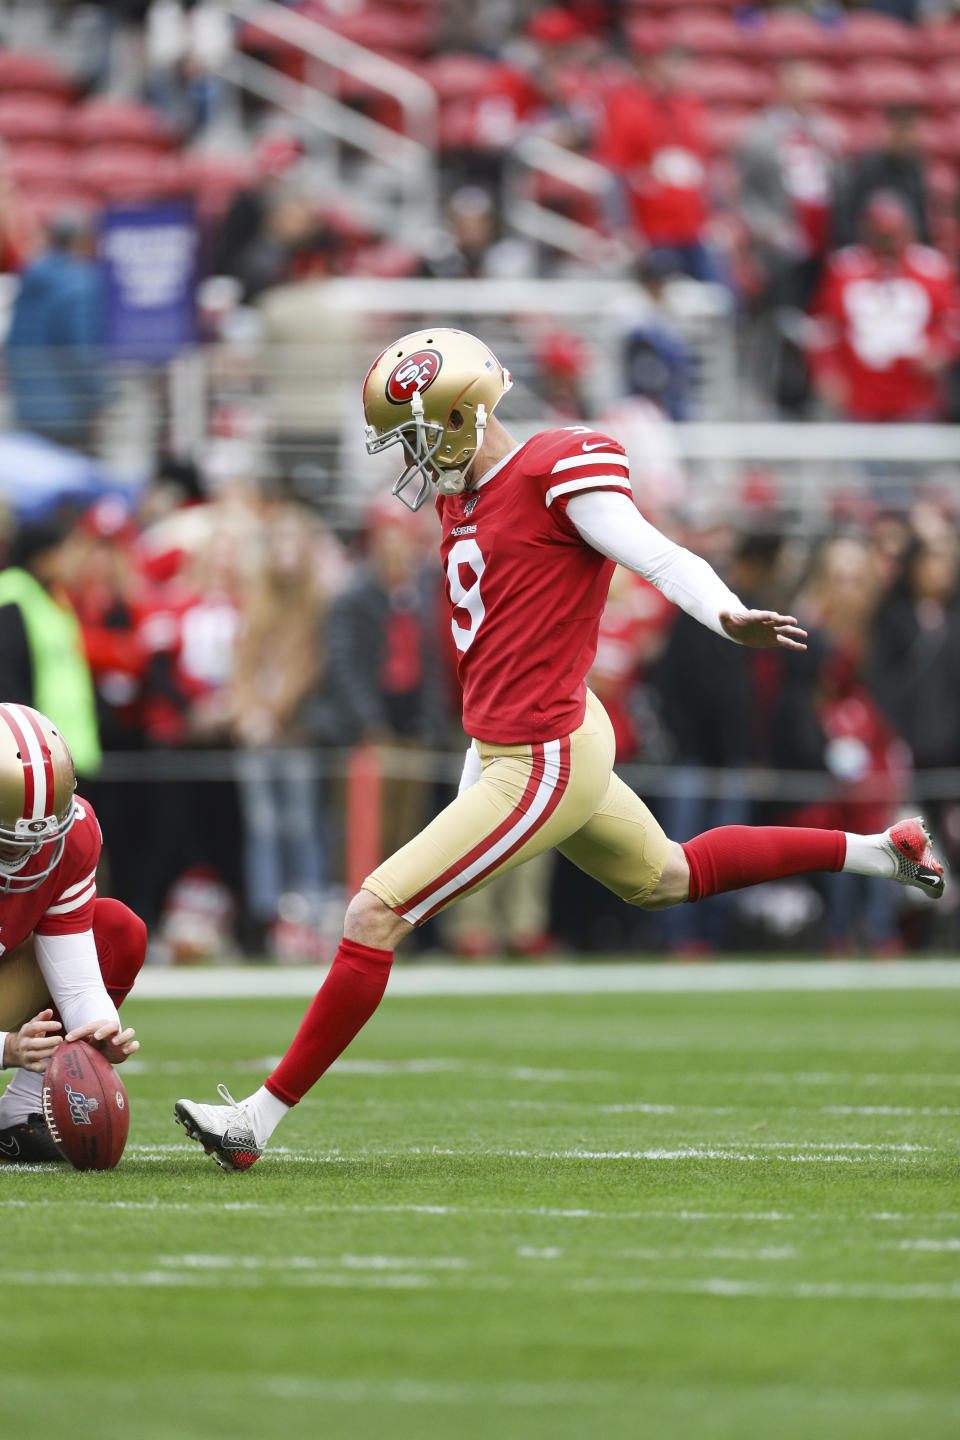 San Francisco 49ers kicker Robbie Gould (9) kicks a field goal during warm-ups in the NFL NFC Championship football game against the Green Bay Packers, Sunday, Jan. 19, 2020 in Santa Clara, Calif. The 49ers defeated the Packers 37-20. (Margaret Bowles via AP)